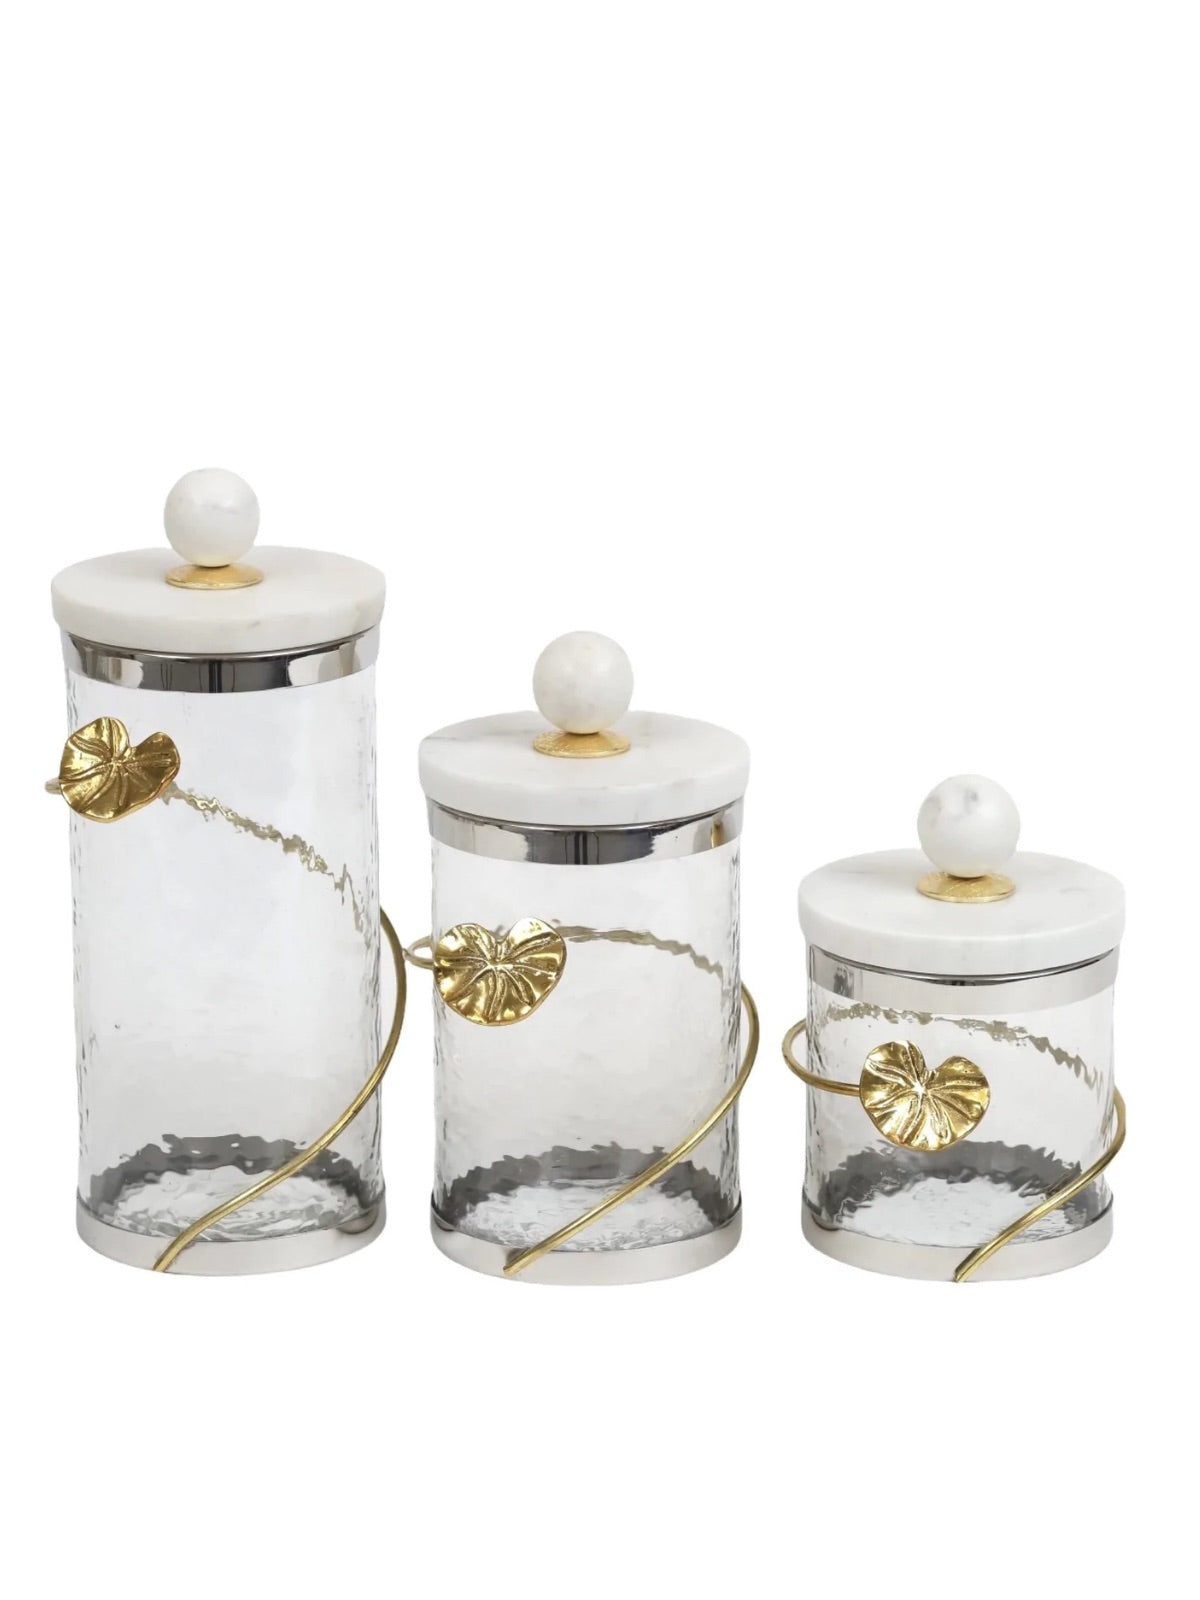 These Glass Canister with Gold Metal Heart Design and Marble Lid are available in 3 sizes and Sold by KYA Home Decor